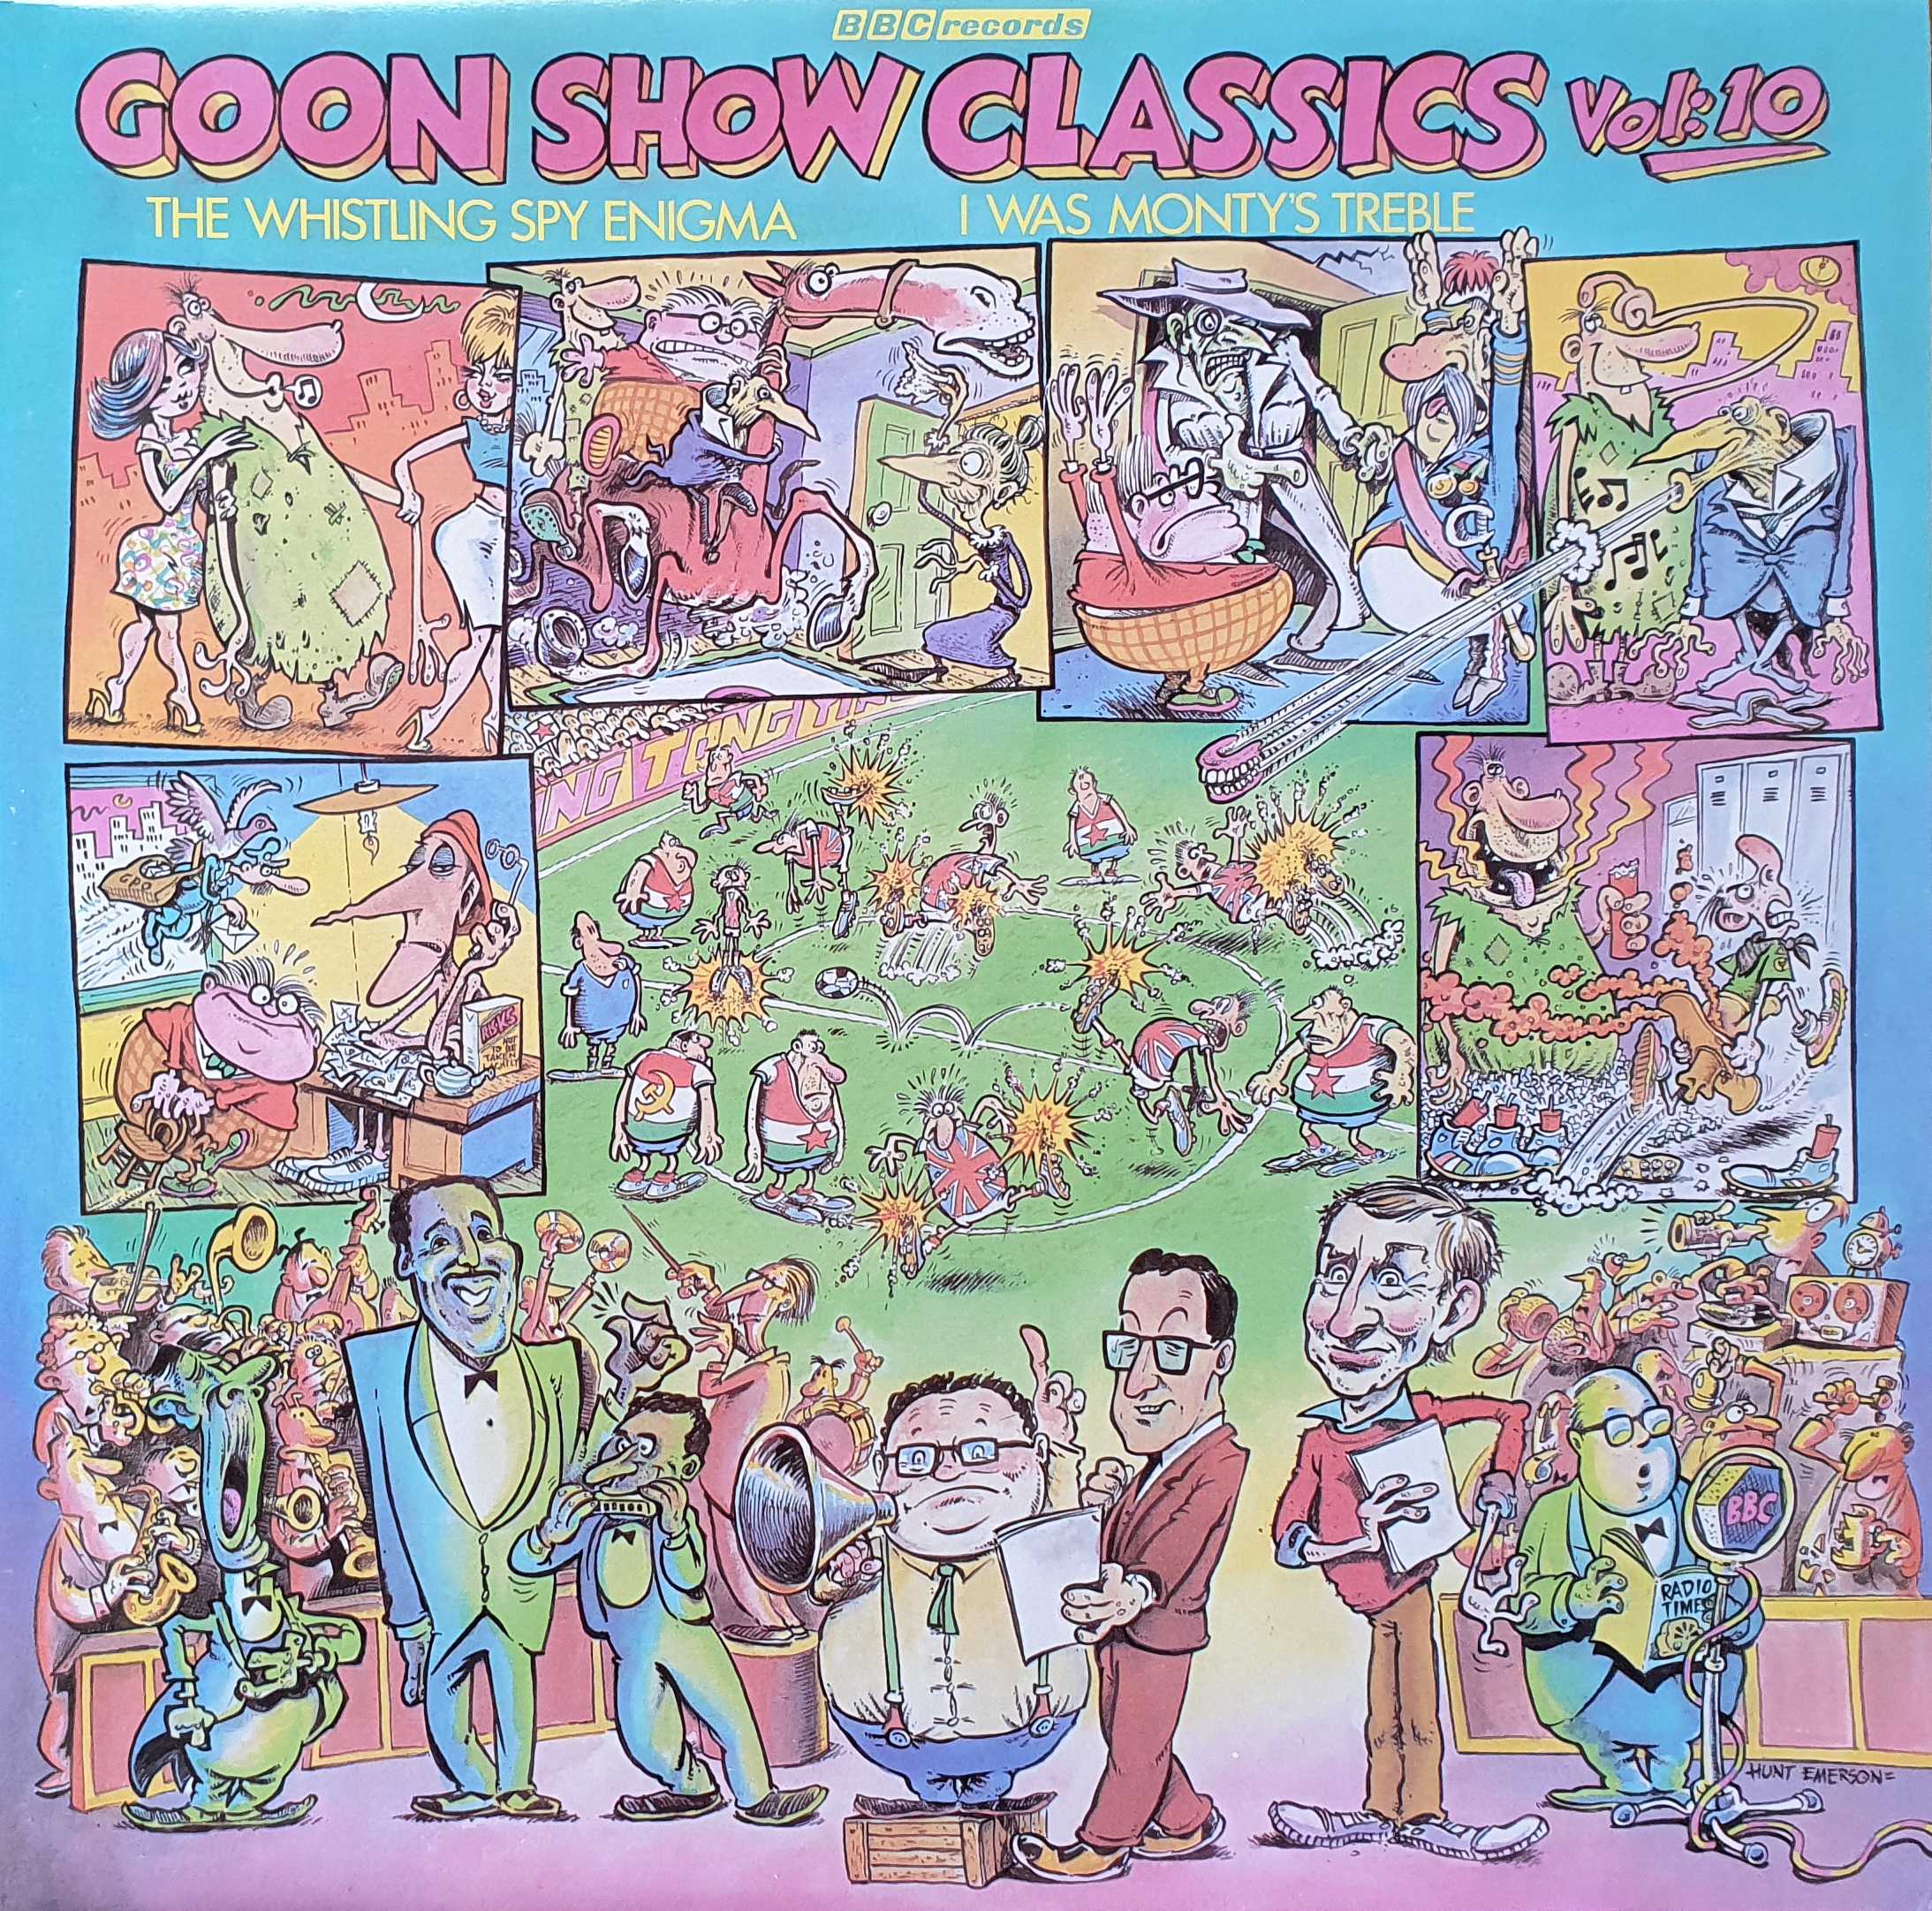 Picture of 815 433-1 Goon show classics - Volume 10 (Australian import) by artist Spike Milligan from the BBC albums - Records and Tapes library